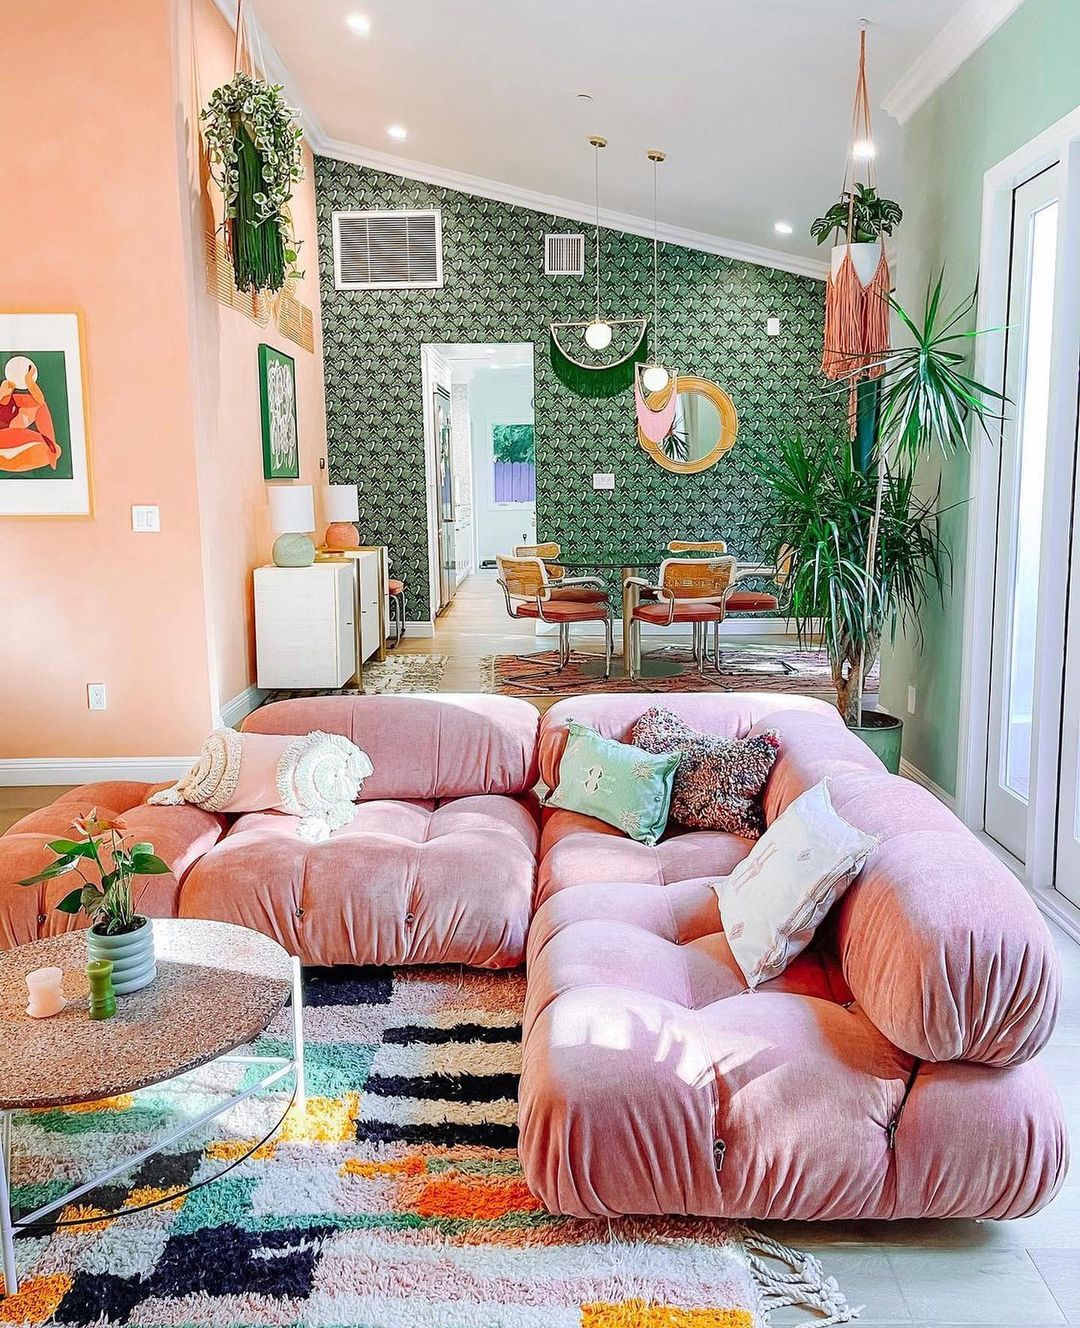 Eclectic Coziness with Plush Pink Comfort